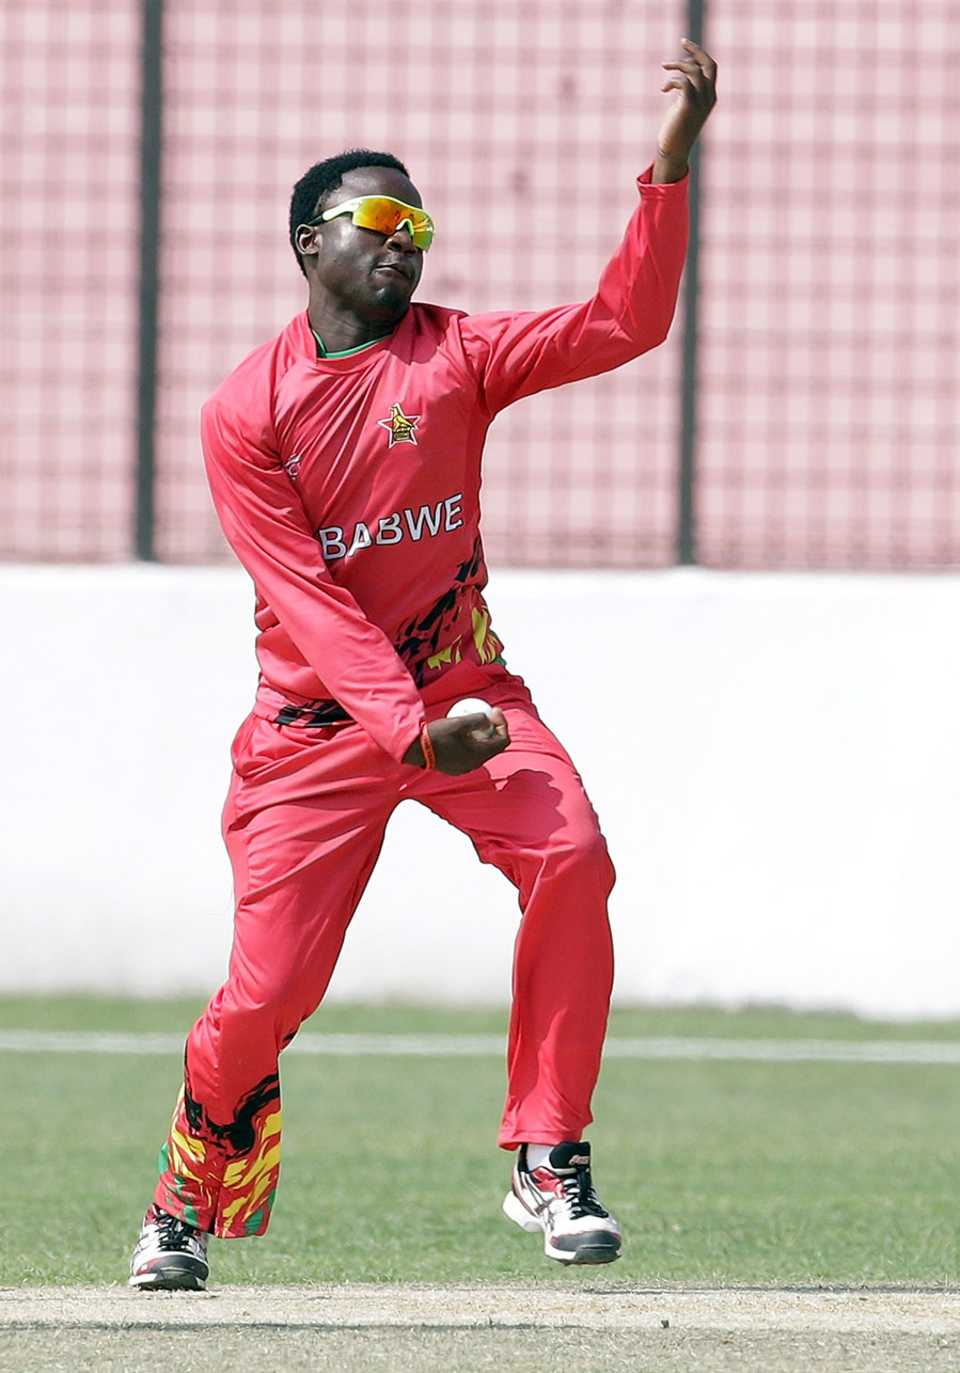 Natsai M'Shangwe in his delivery stride